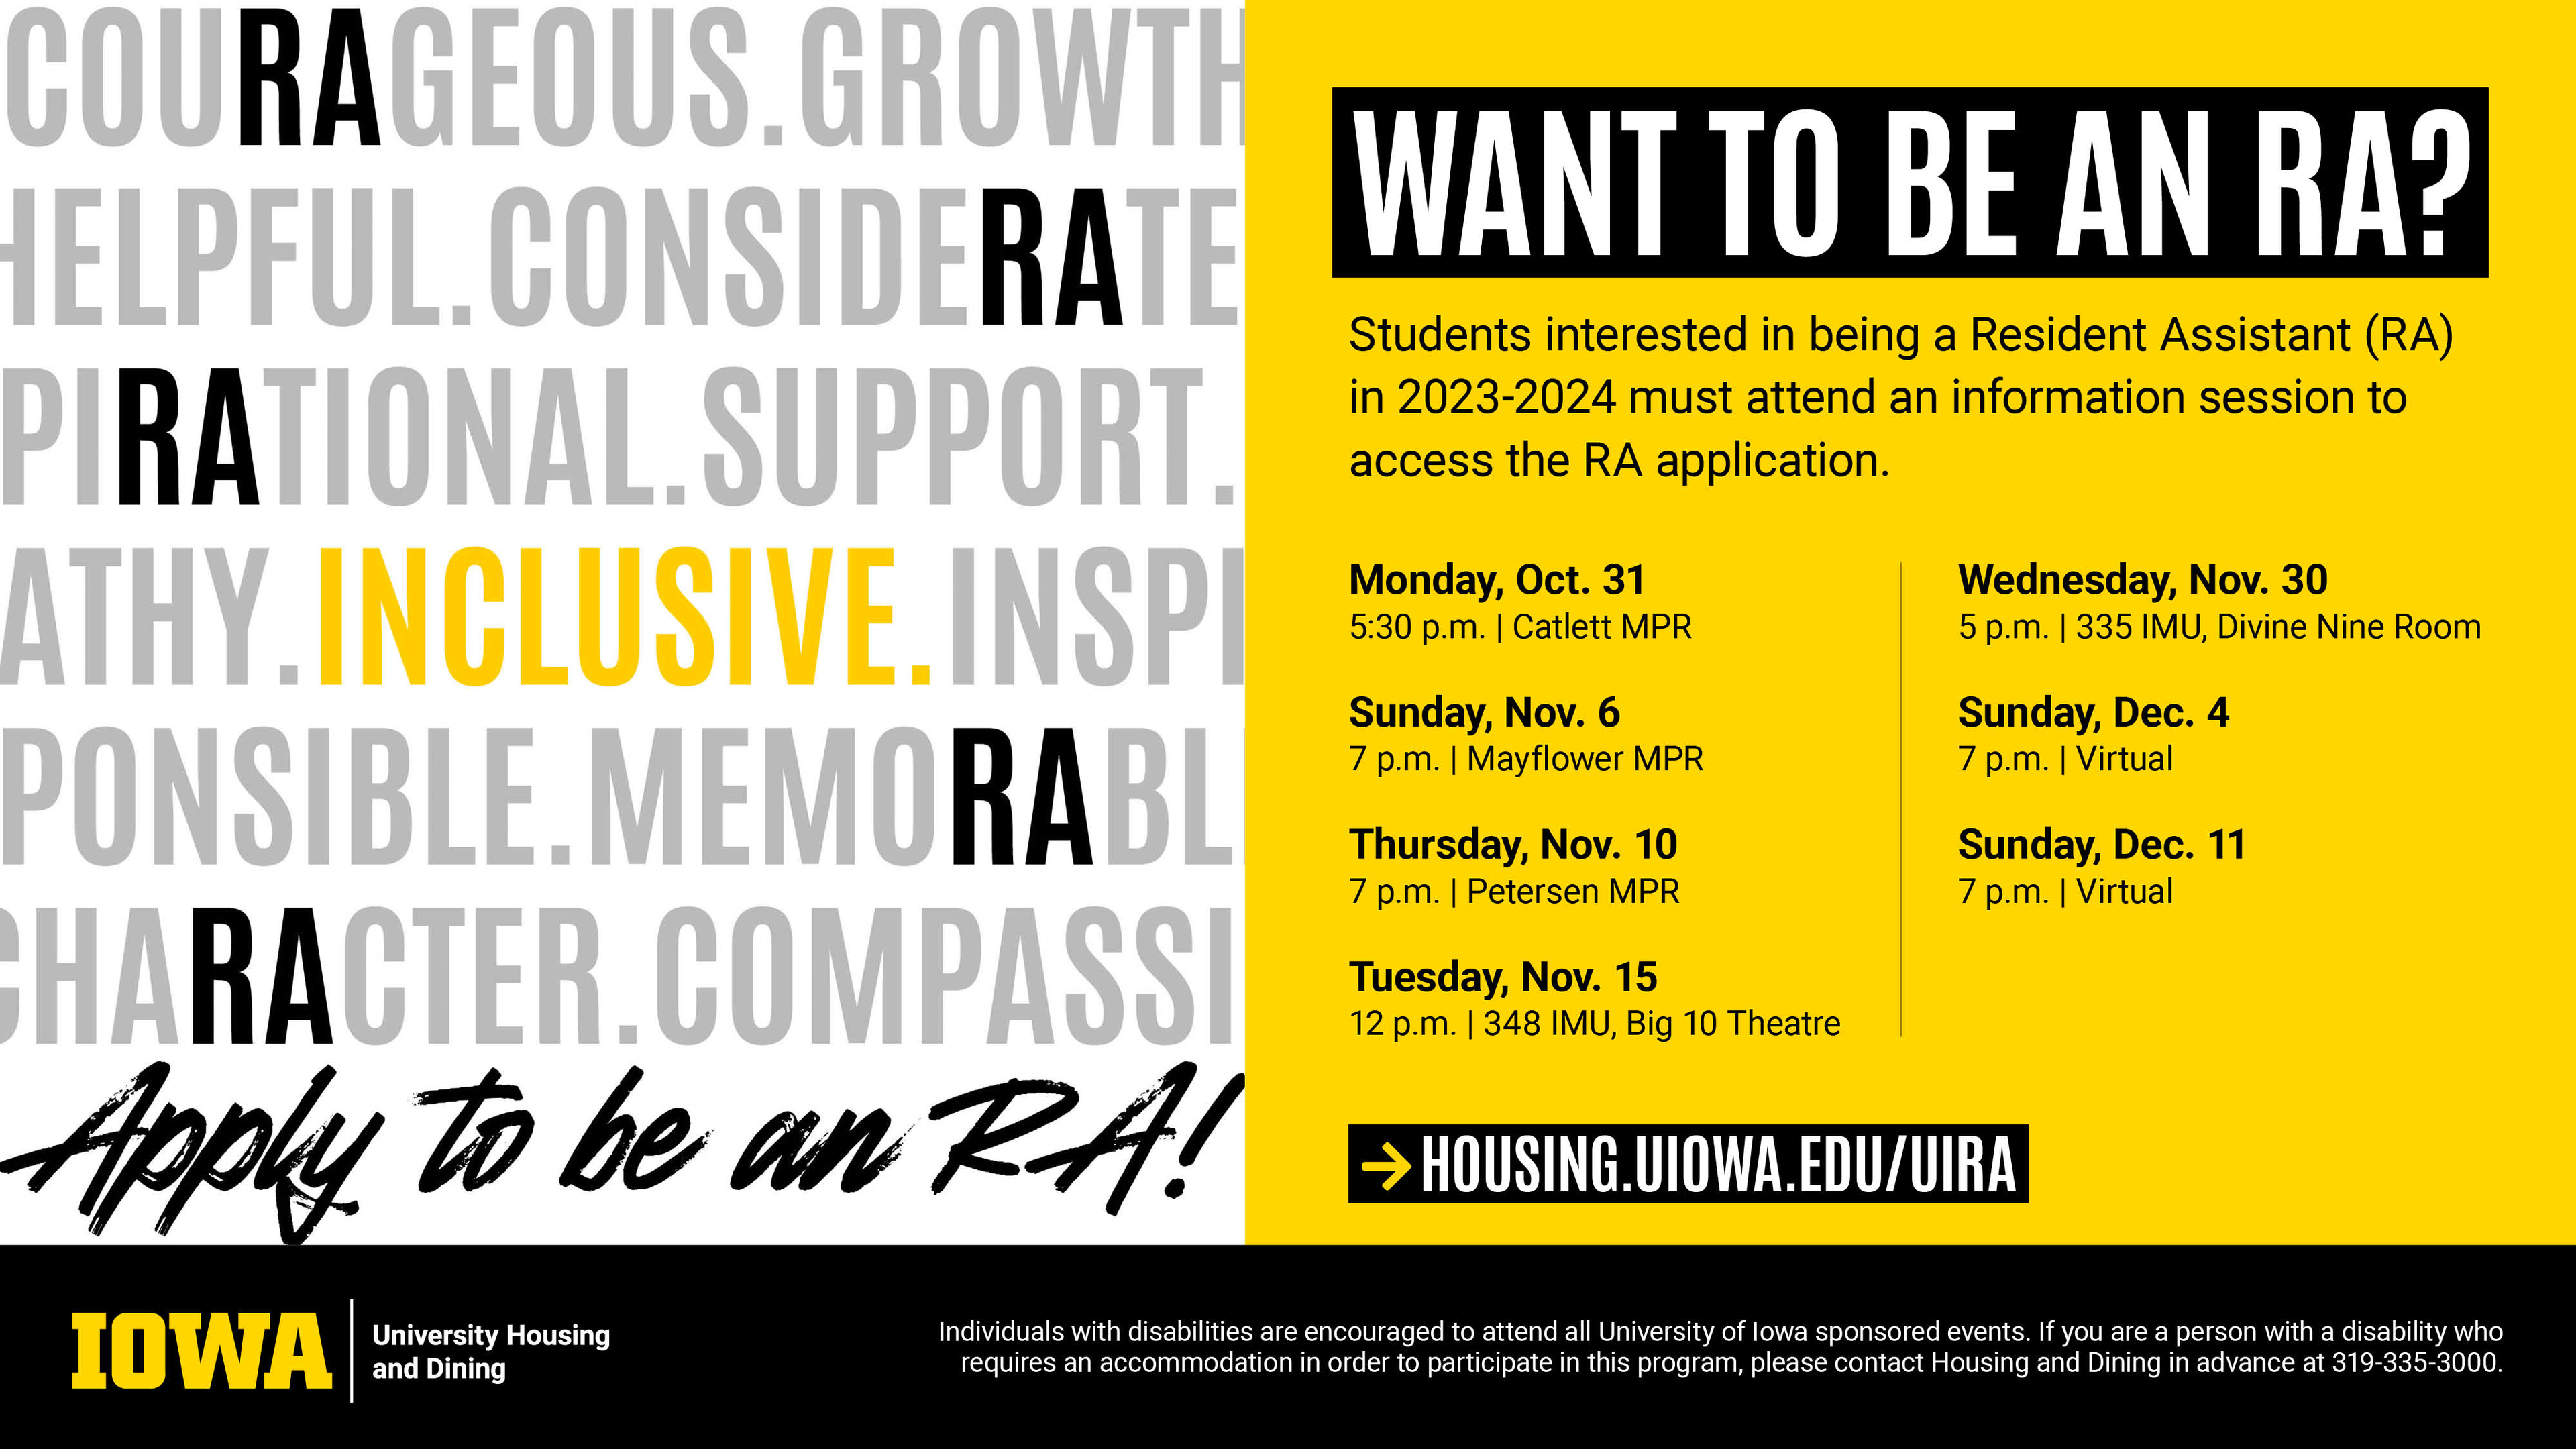 Want to be an RA? with words in gray and black and "inclusive" standing out in yellow.  Housing.UIOWA.edu/UIRA